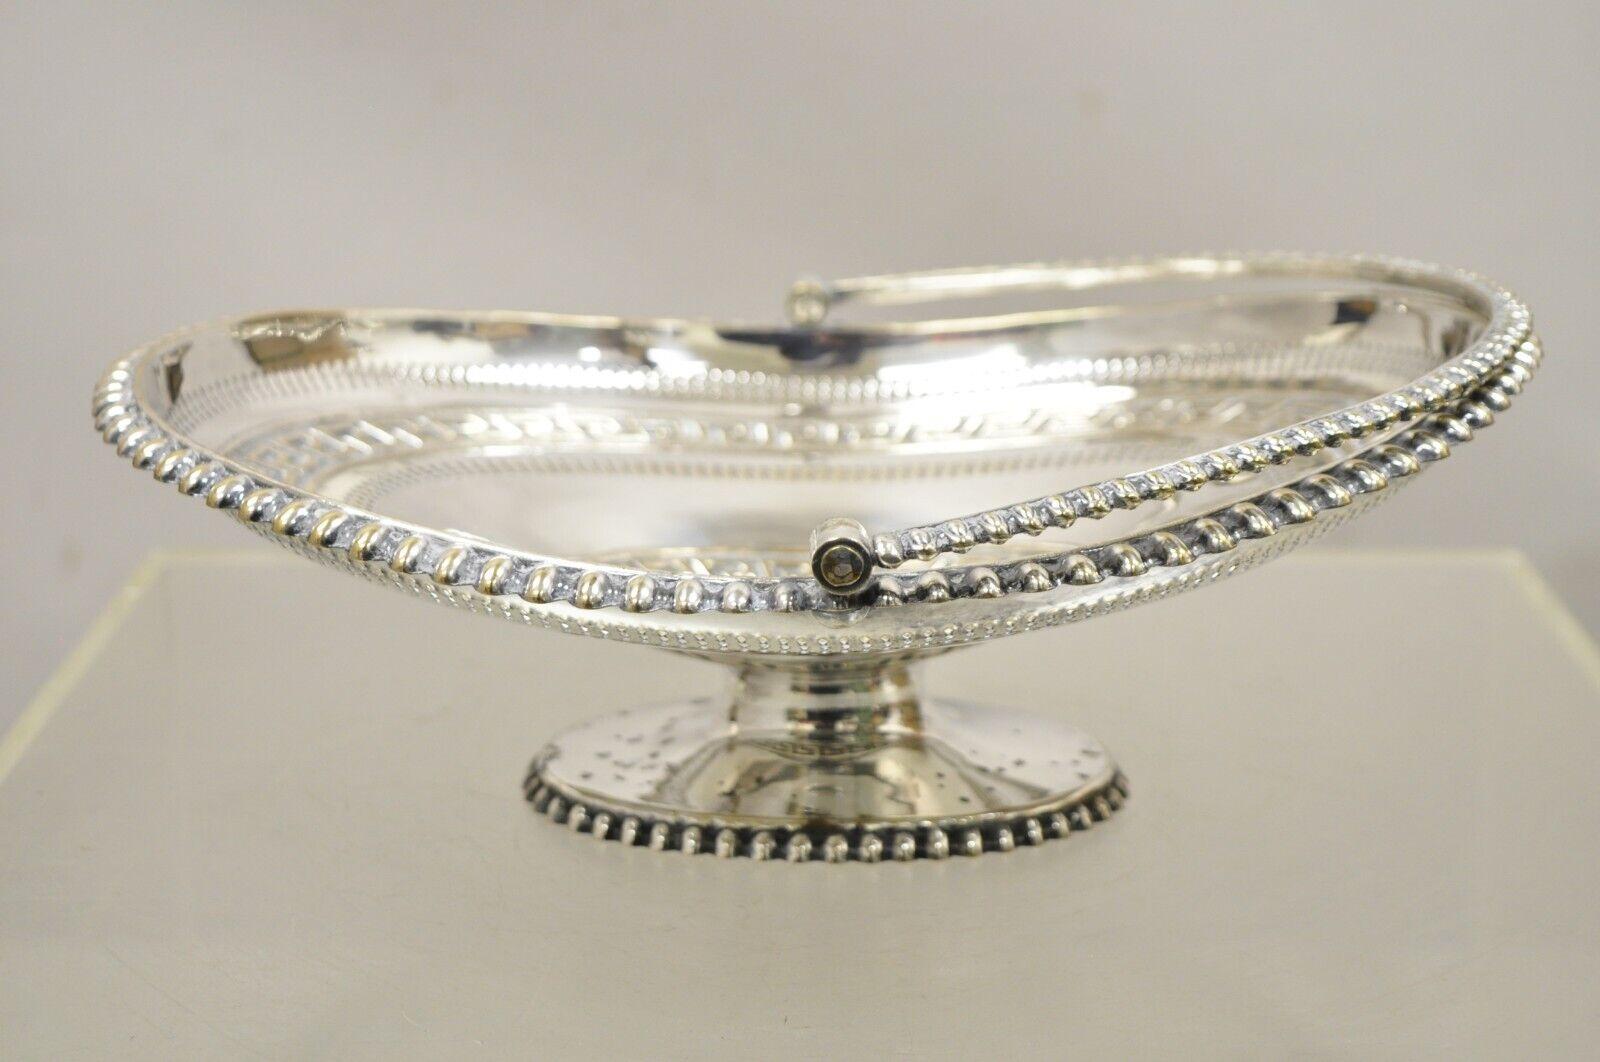 Antique English Regency Silver Plated Greek Key Cake Basket Serving Platter. Item features a serving handle, Greek key design, pedestal base, beaded trim, very nice antique item, great style and form. Circa 19th Century. Measurements: 4